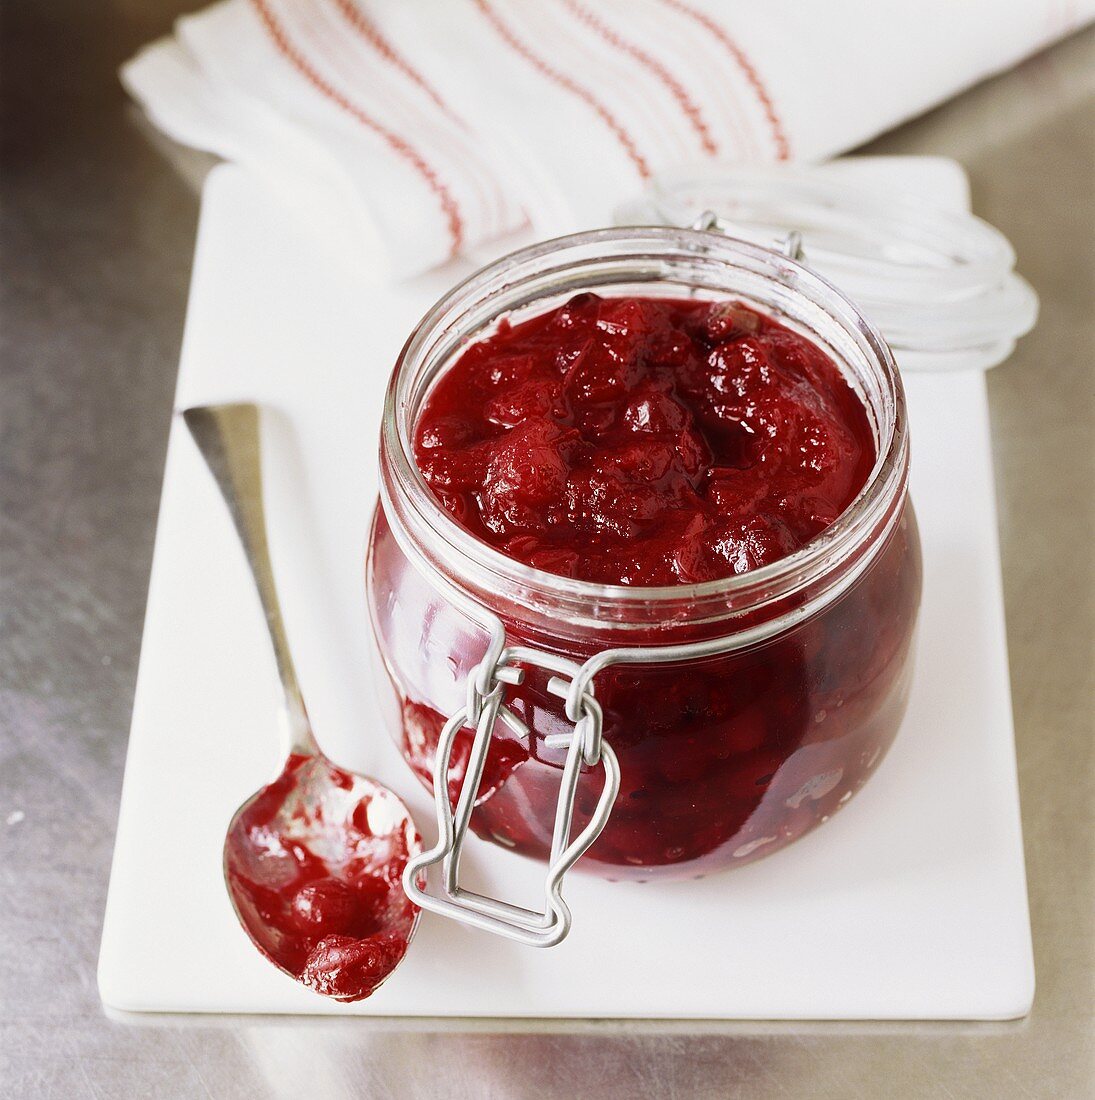 Cranberry relish in preserving jar, spoon beside it